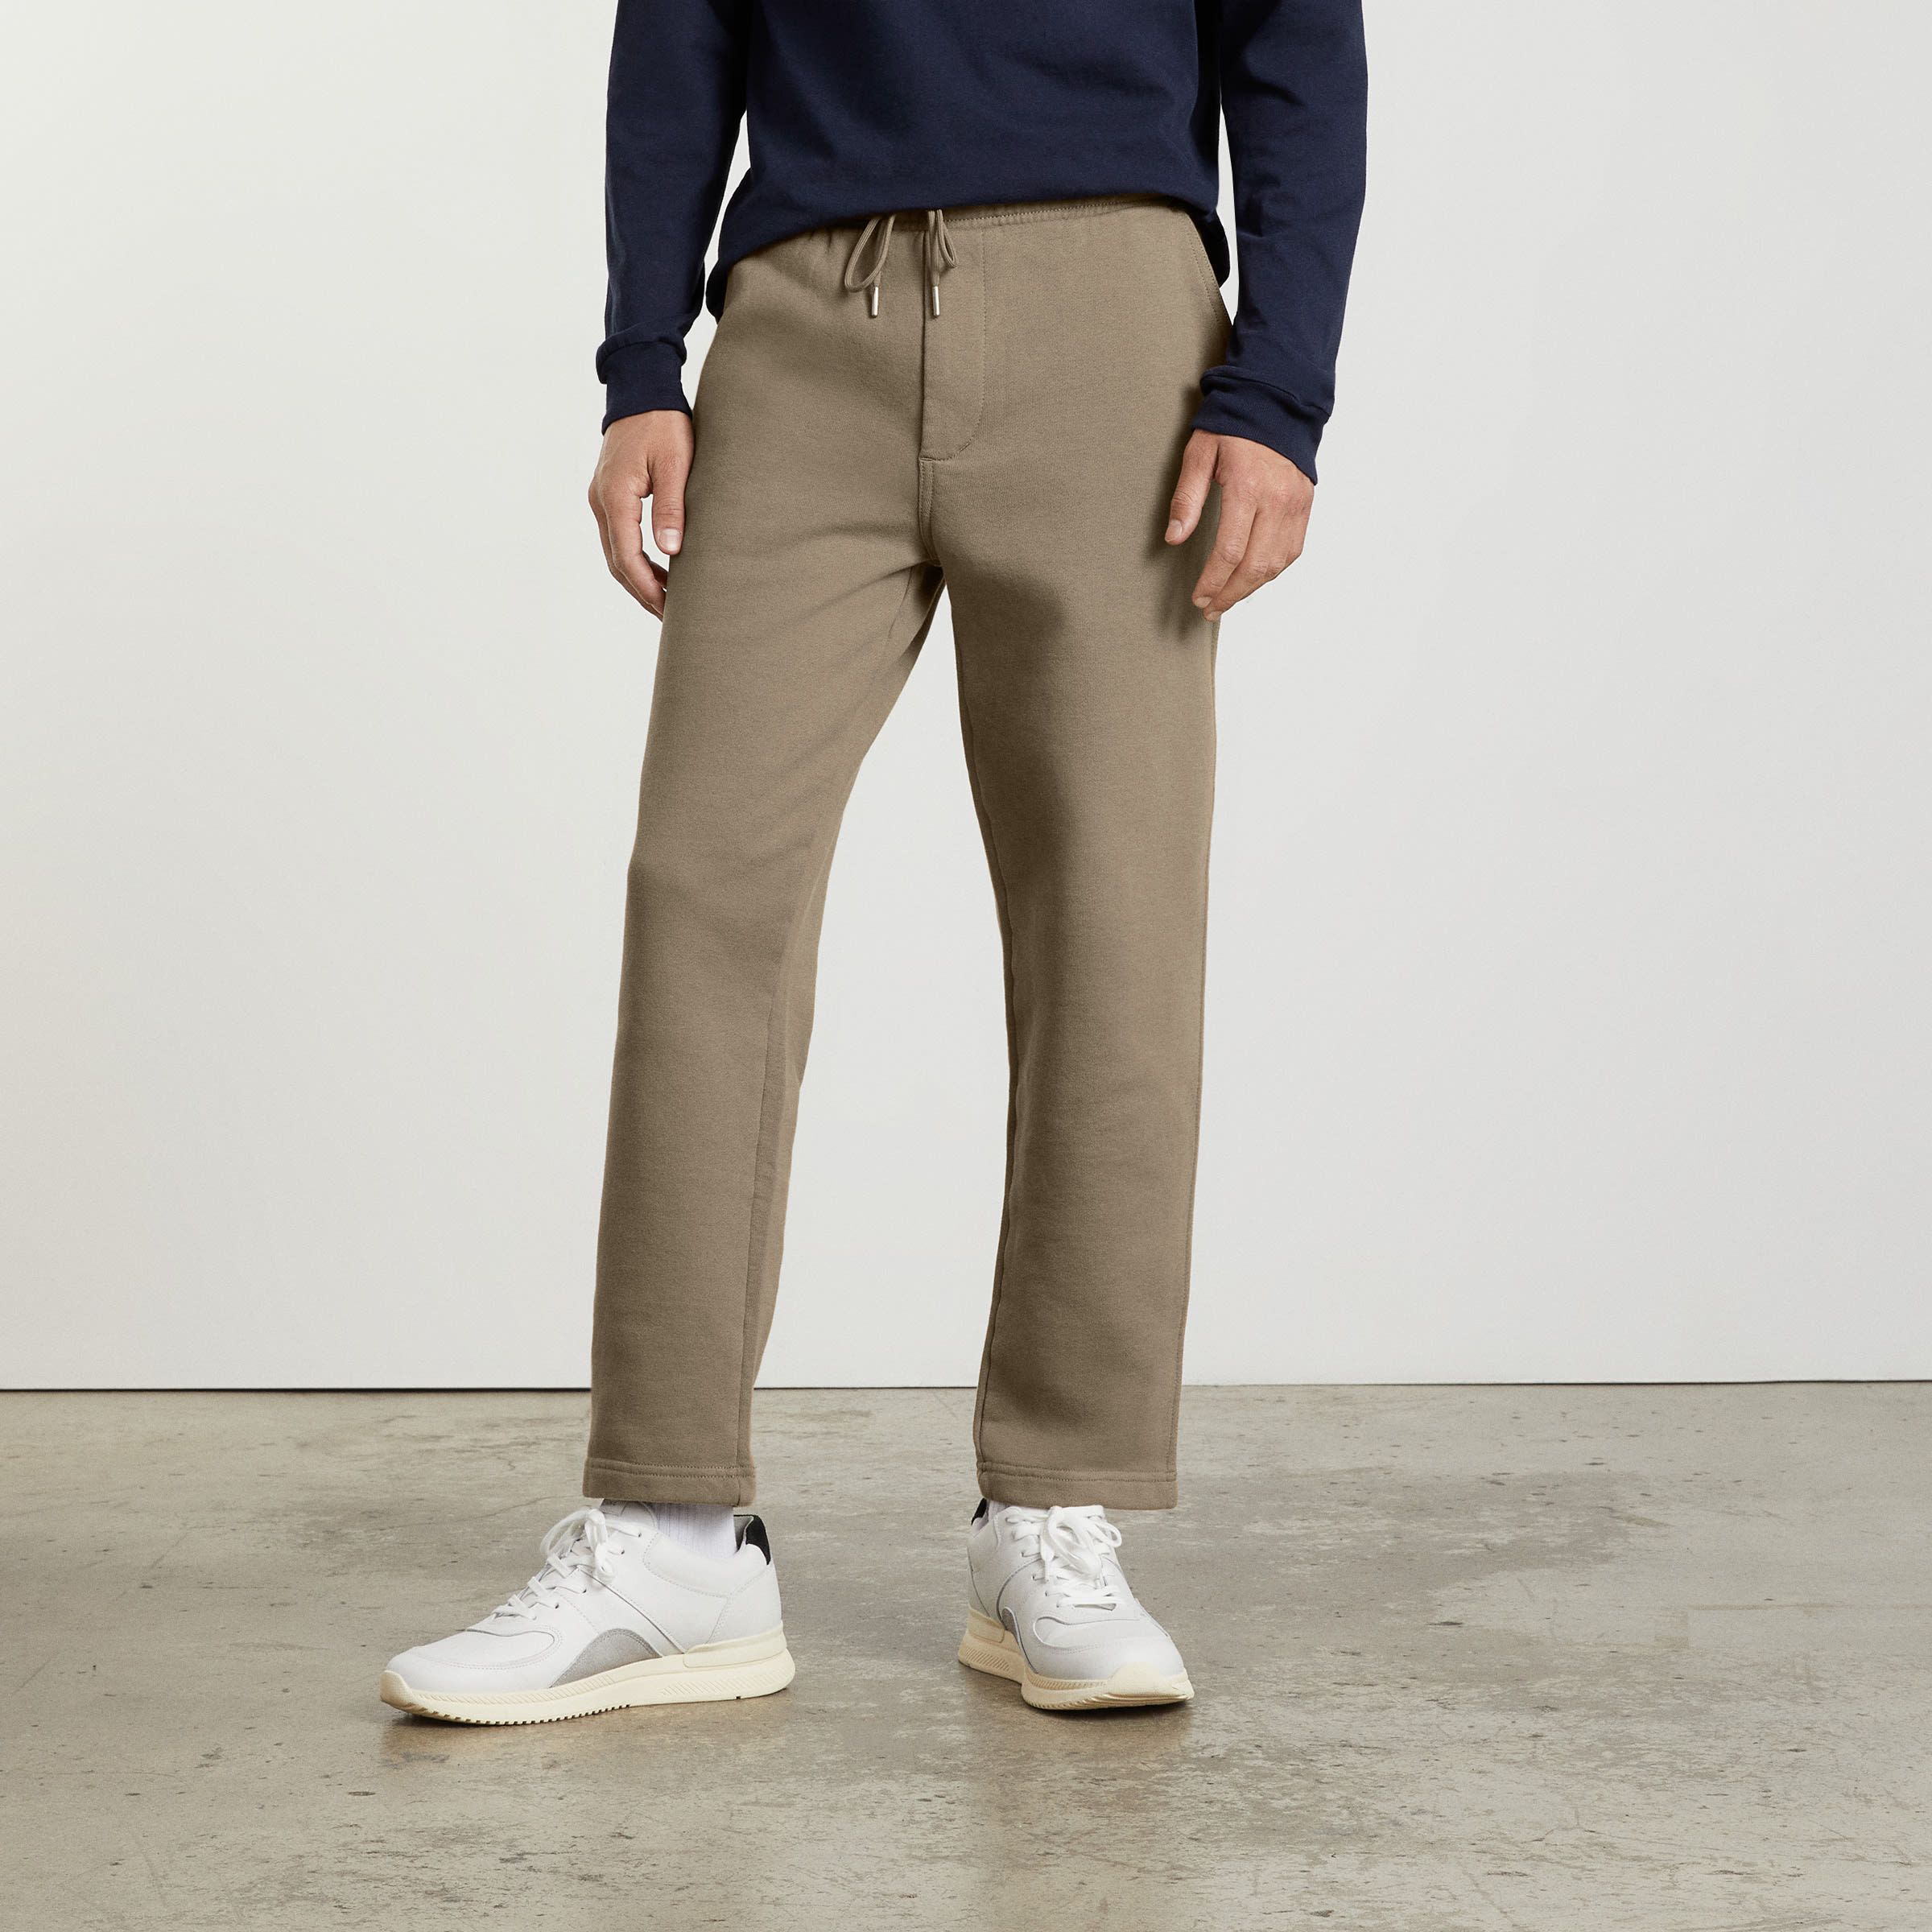 The Organic French Terry Sweatpant